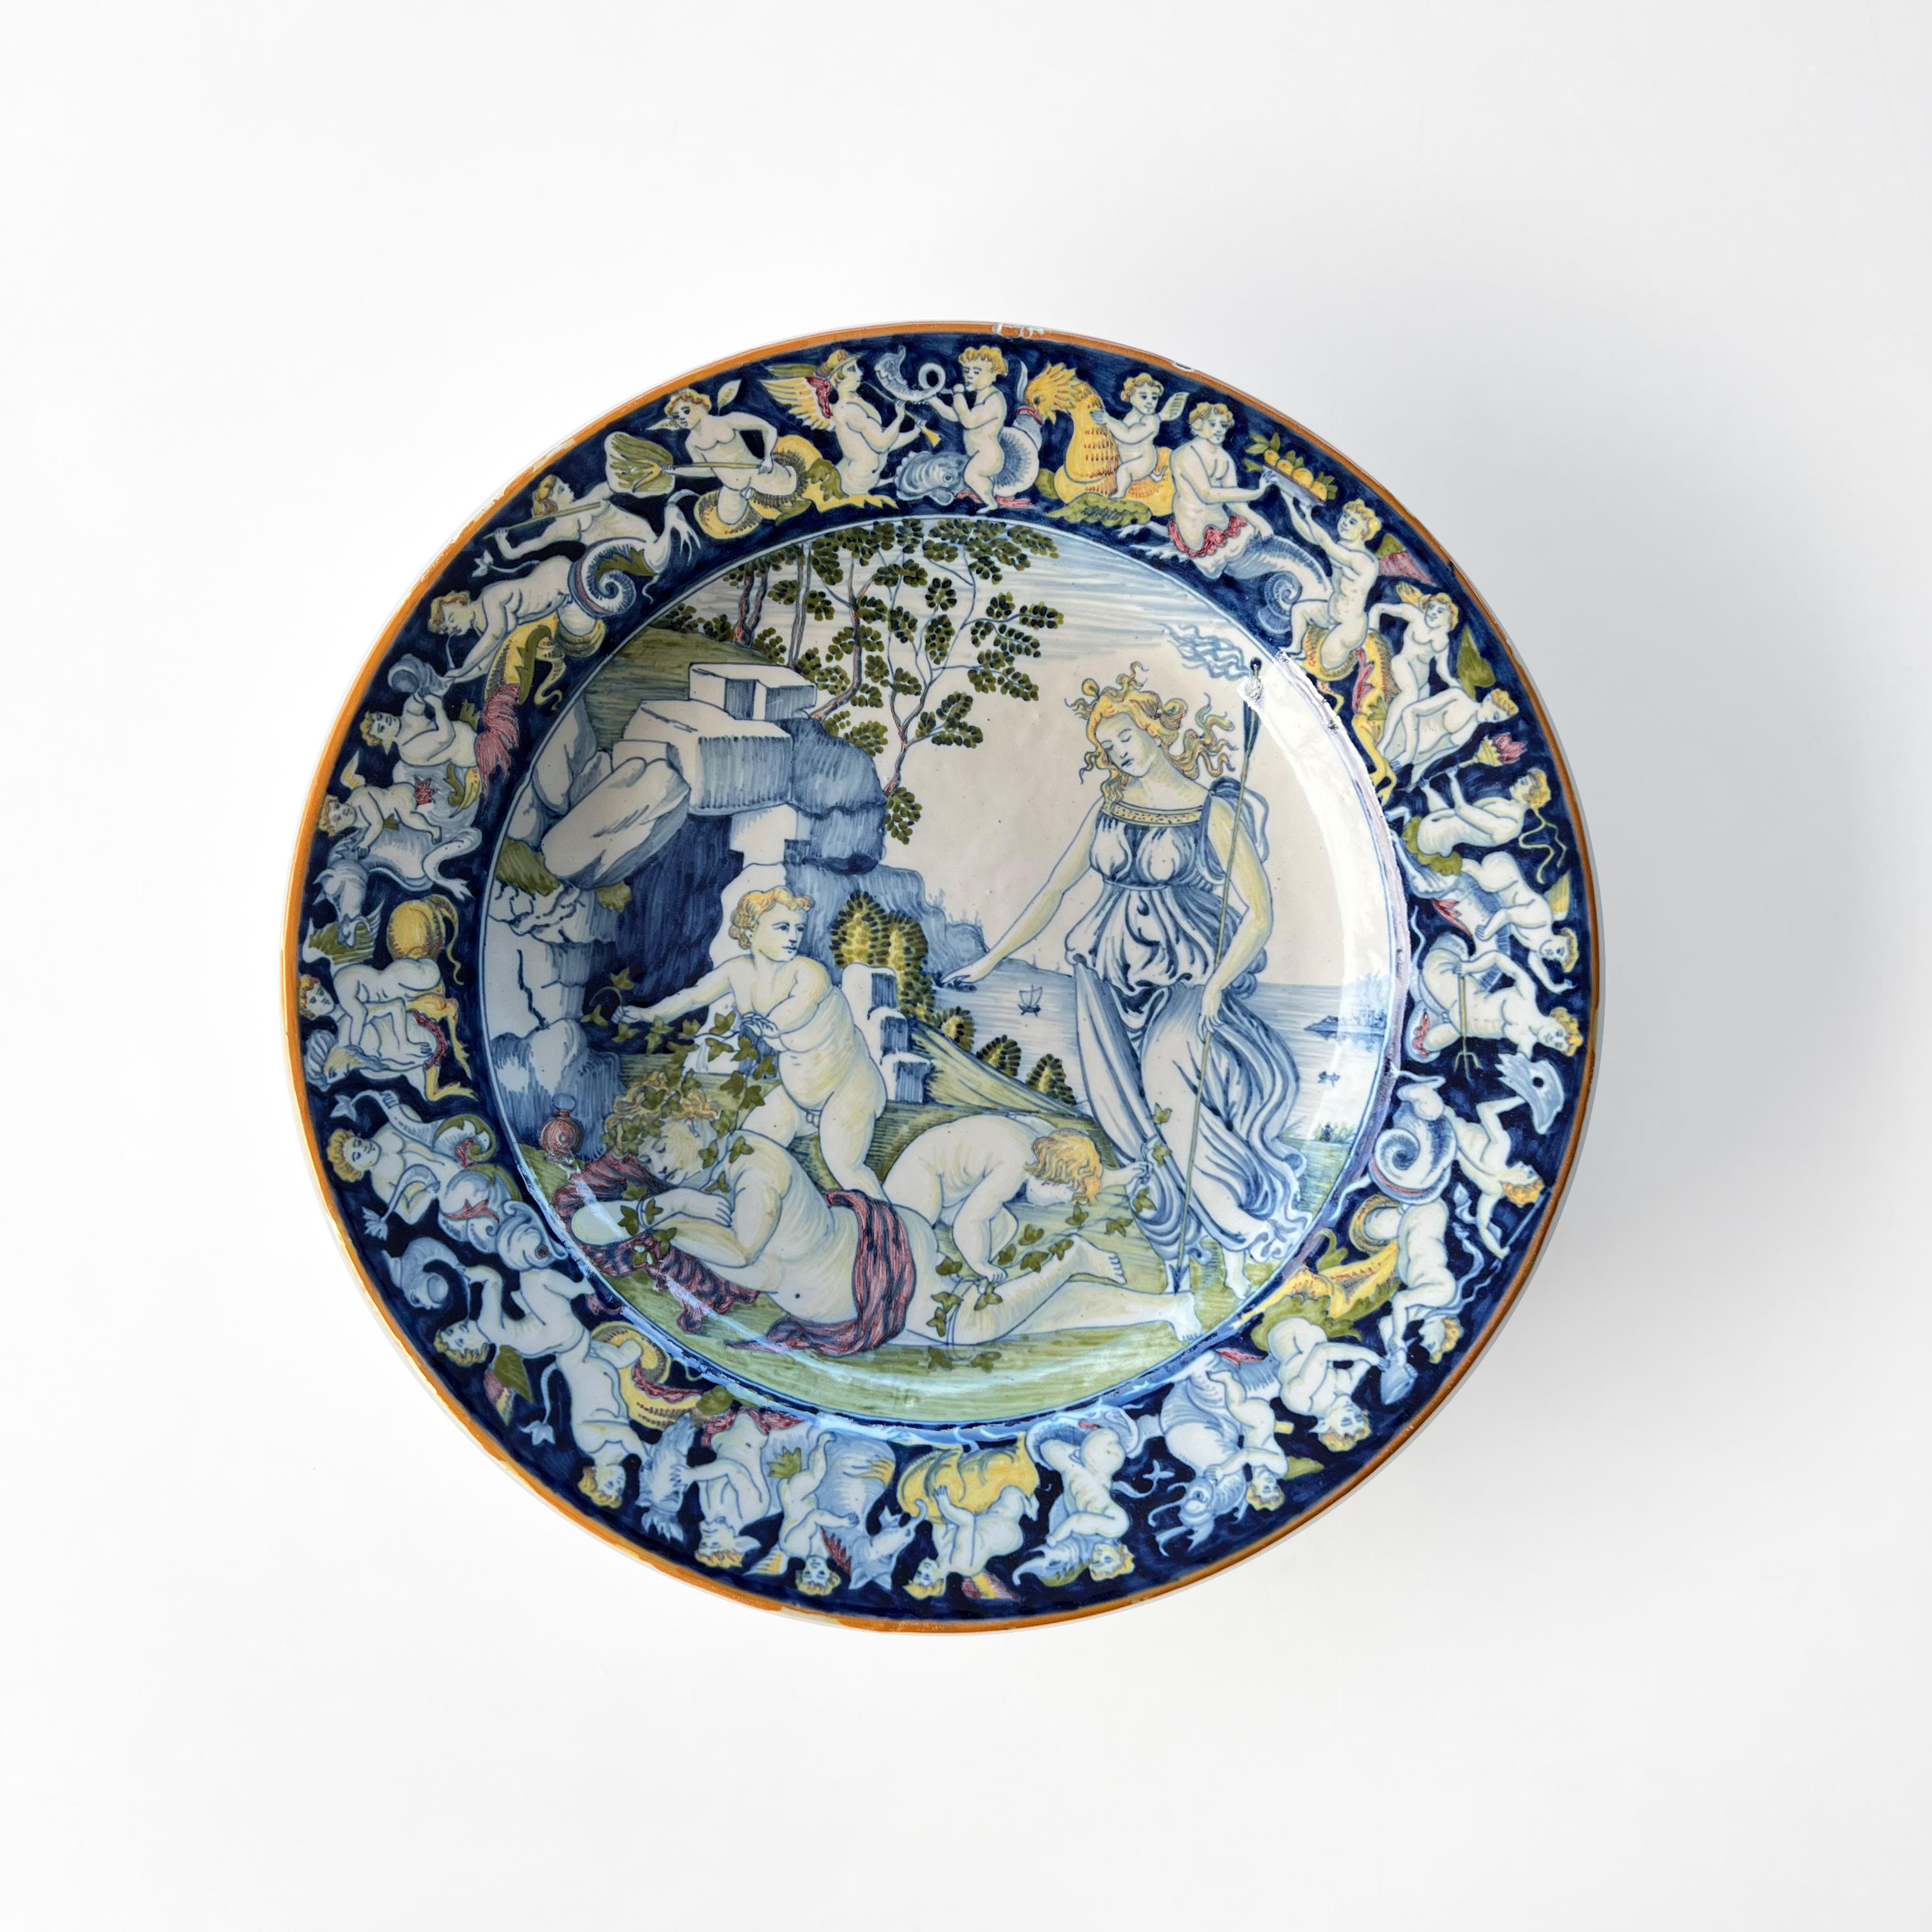 This beautiful platter in hand painted majolica is a copy of an important piece by renowned Renaissance artist Jacopo Schiavon, from the Tuscan town of Cafaggiolo. 
The original is in the collection of the Fundação Calouste Gulbenkian in Lisbon,